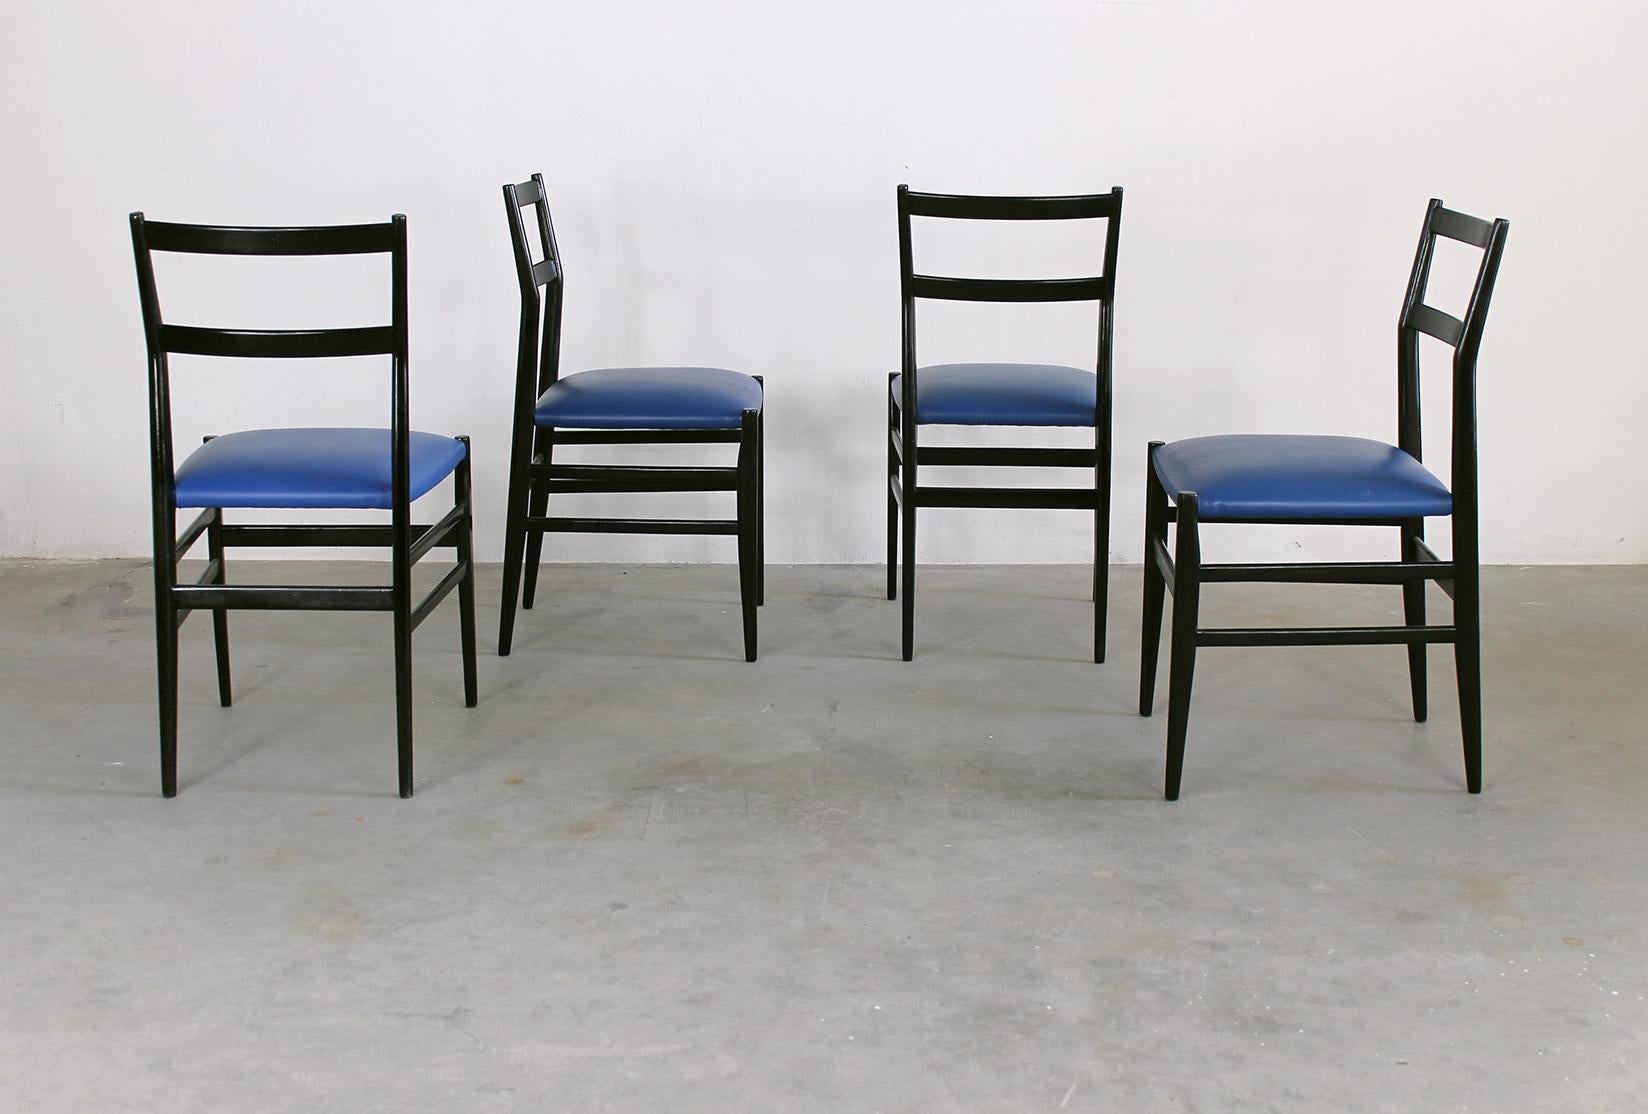 Faux Leather Gio Ponti Set of Four Leggera Dining Chairs by Cassina 1951 Italy For Sale